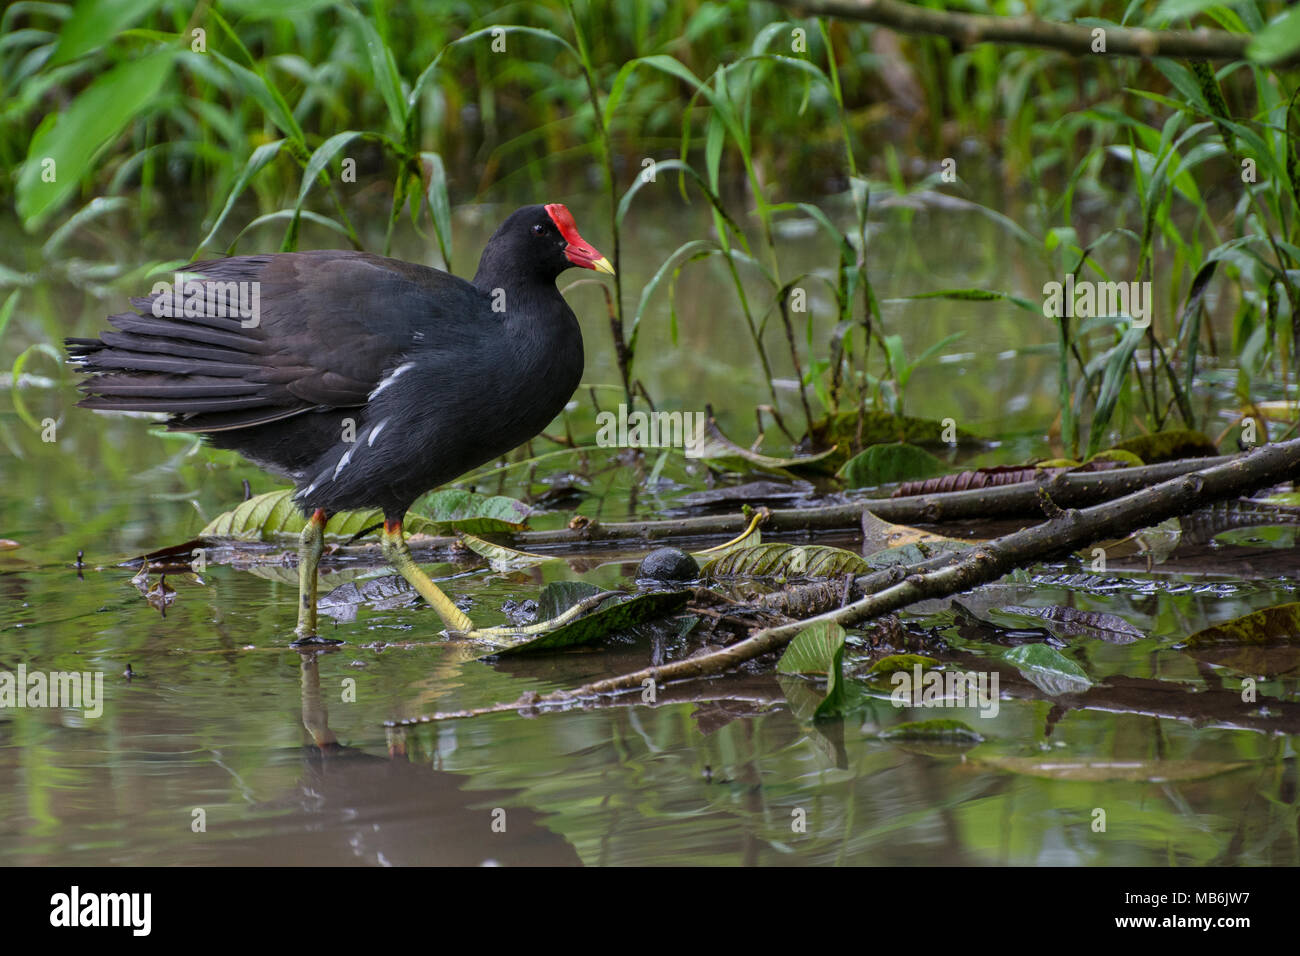 A gallinule also known as a marsh hen from the Galapagos islands. This bird lives in marshes and wetlands. Stock Photo